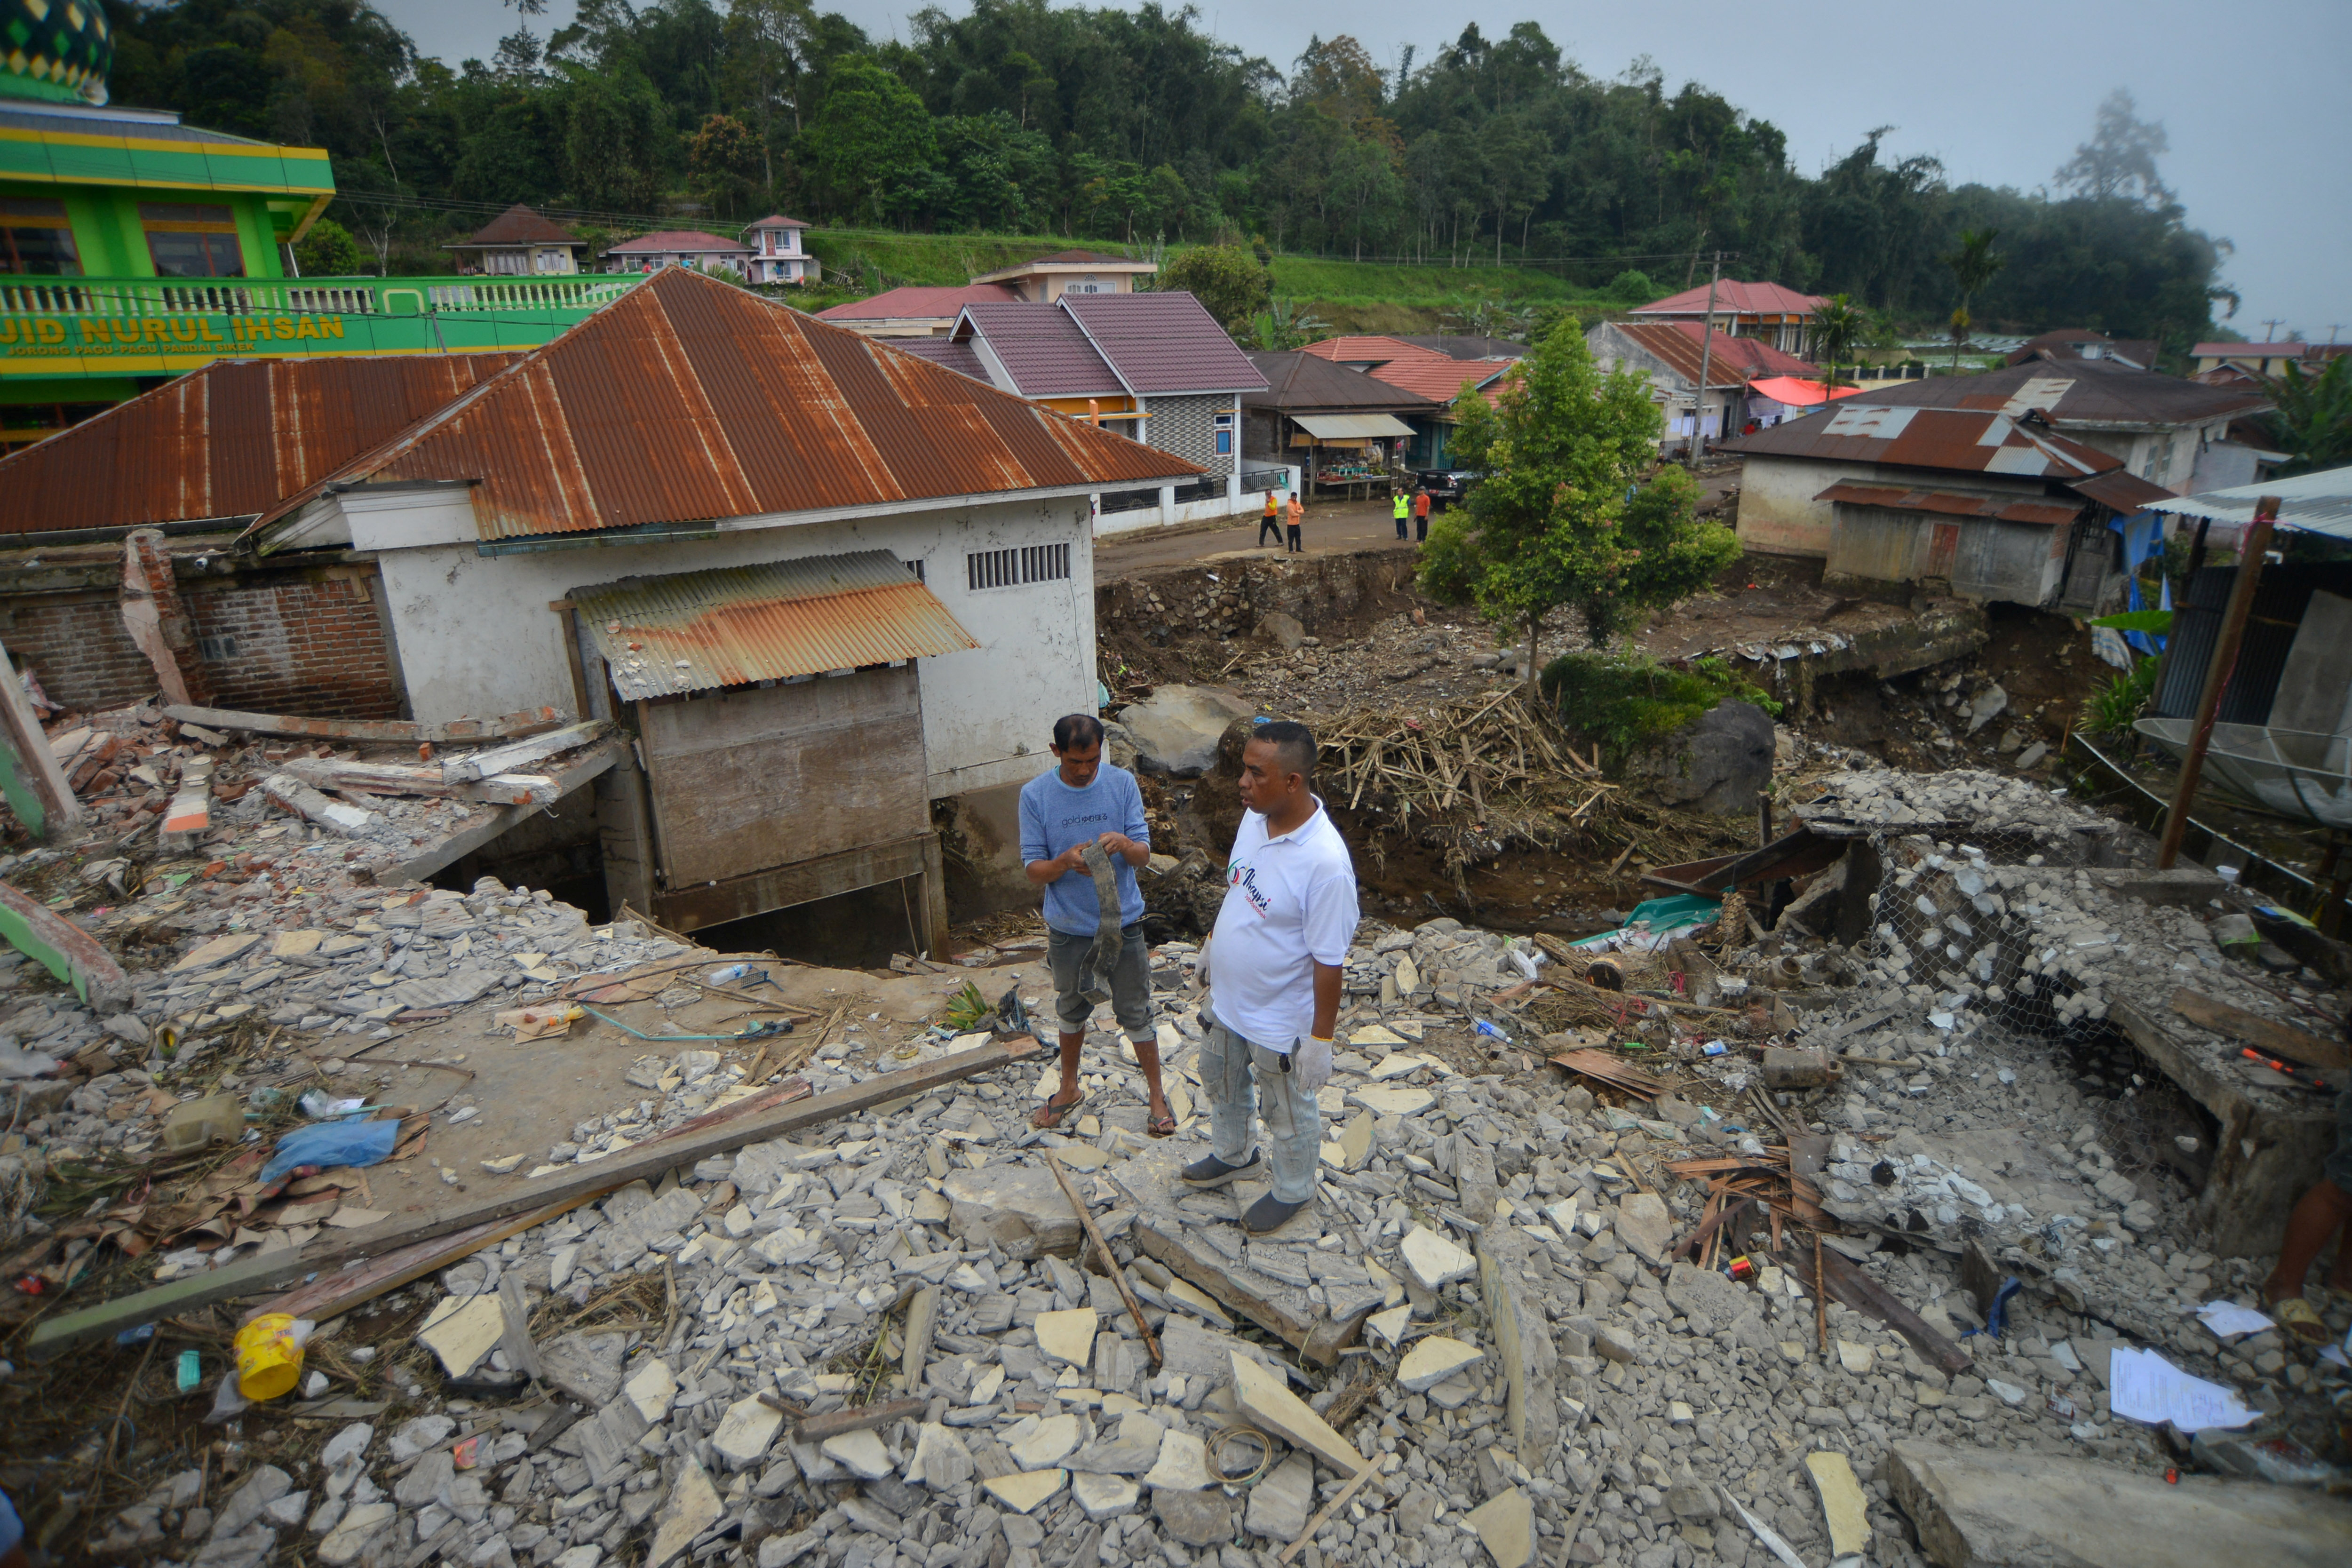 Men stand near a damaged house in an area affected by heavy rain brought flash floods in Tanah Datar